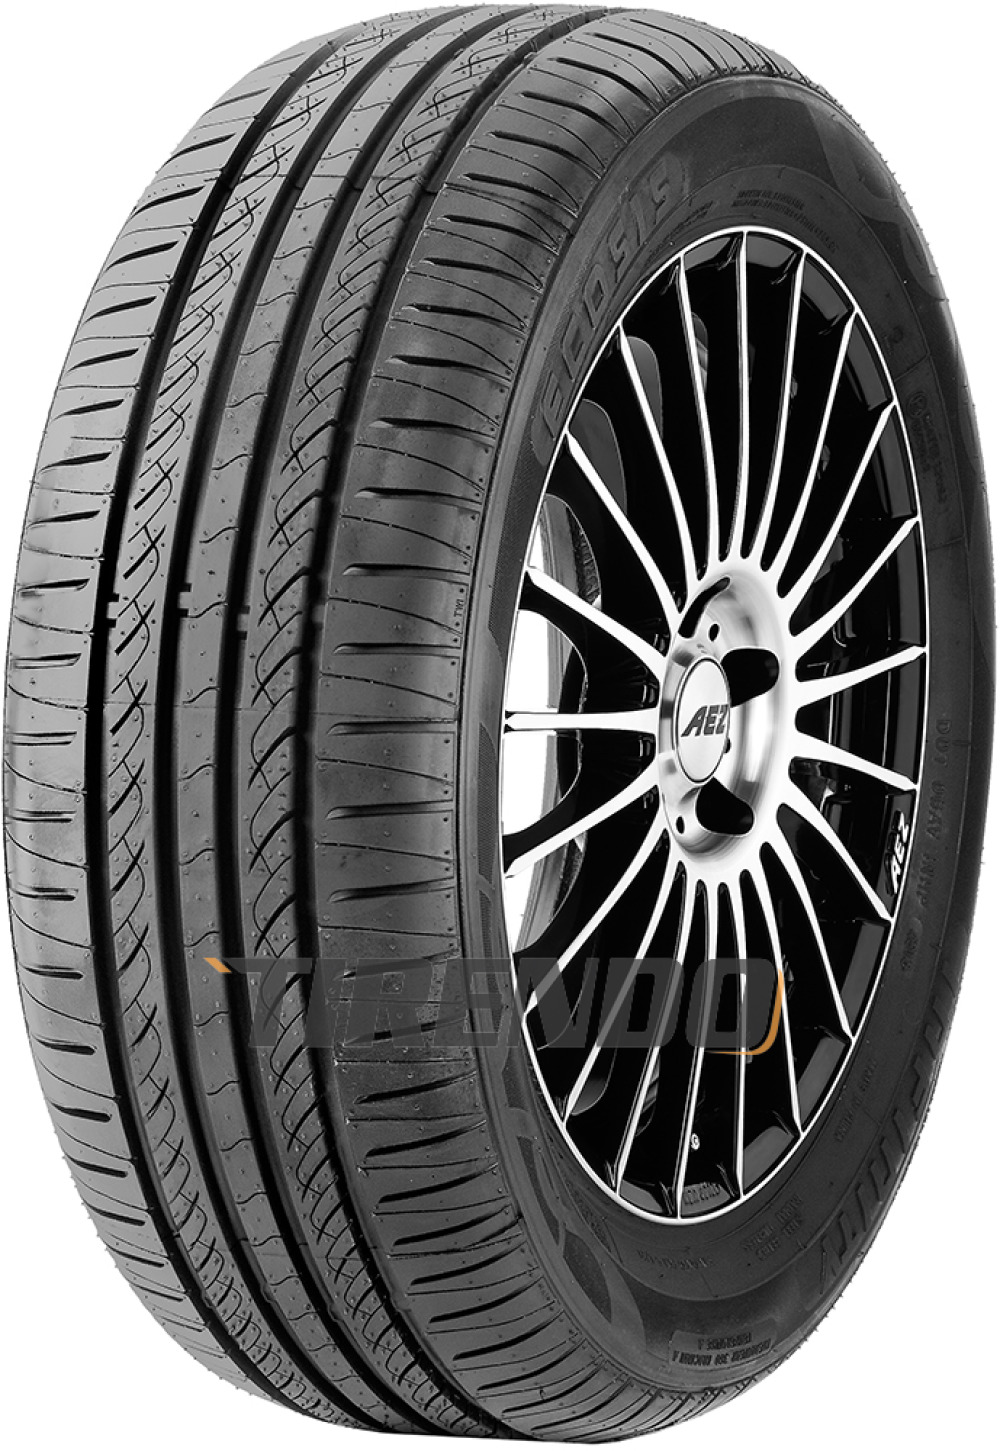 INFINITY ECOSIS 175/60 R 15 81H